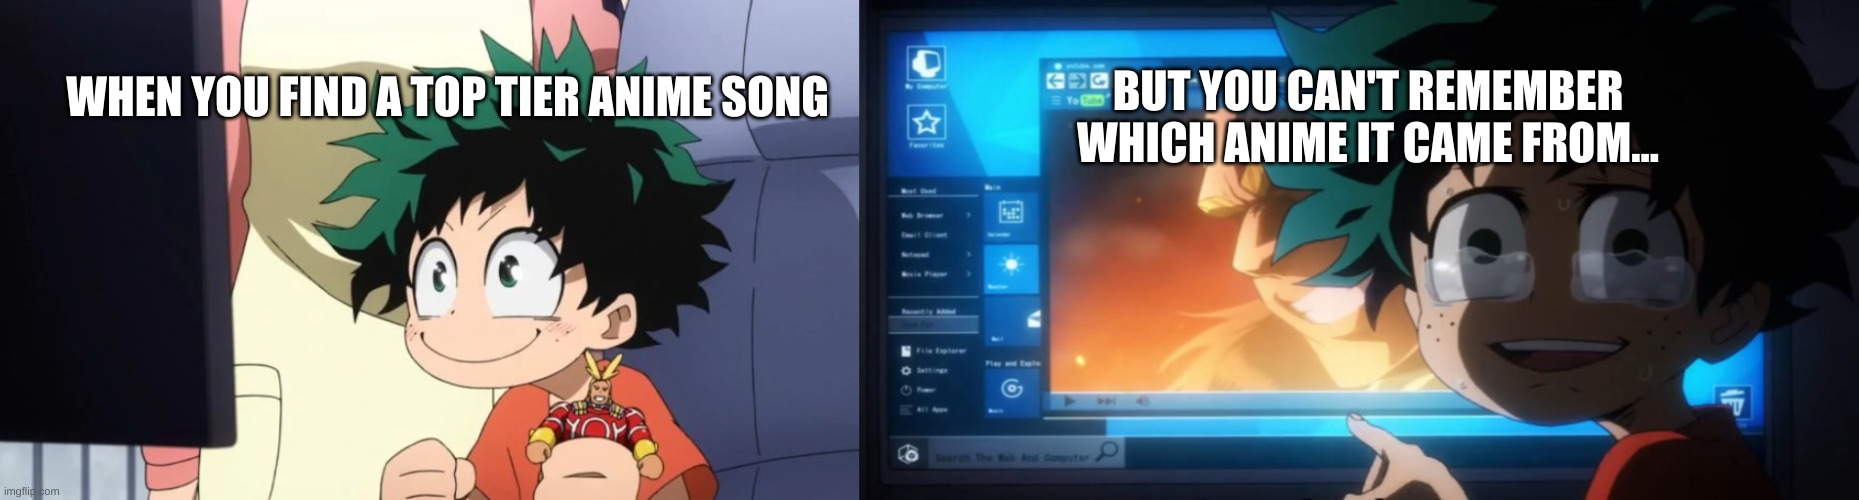 When you find an amazing song but you can't remember the name of it. | BUT YOU CAN'T REMEMBER WHICH ANIME IT CAME FROM... WHEN YOU FIND A TOP TIER ANIME SONG | image tagged in anime,music | made w/ Imgflip meme maker